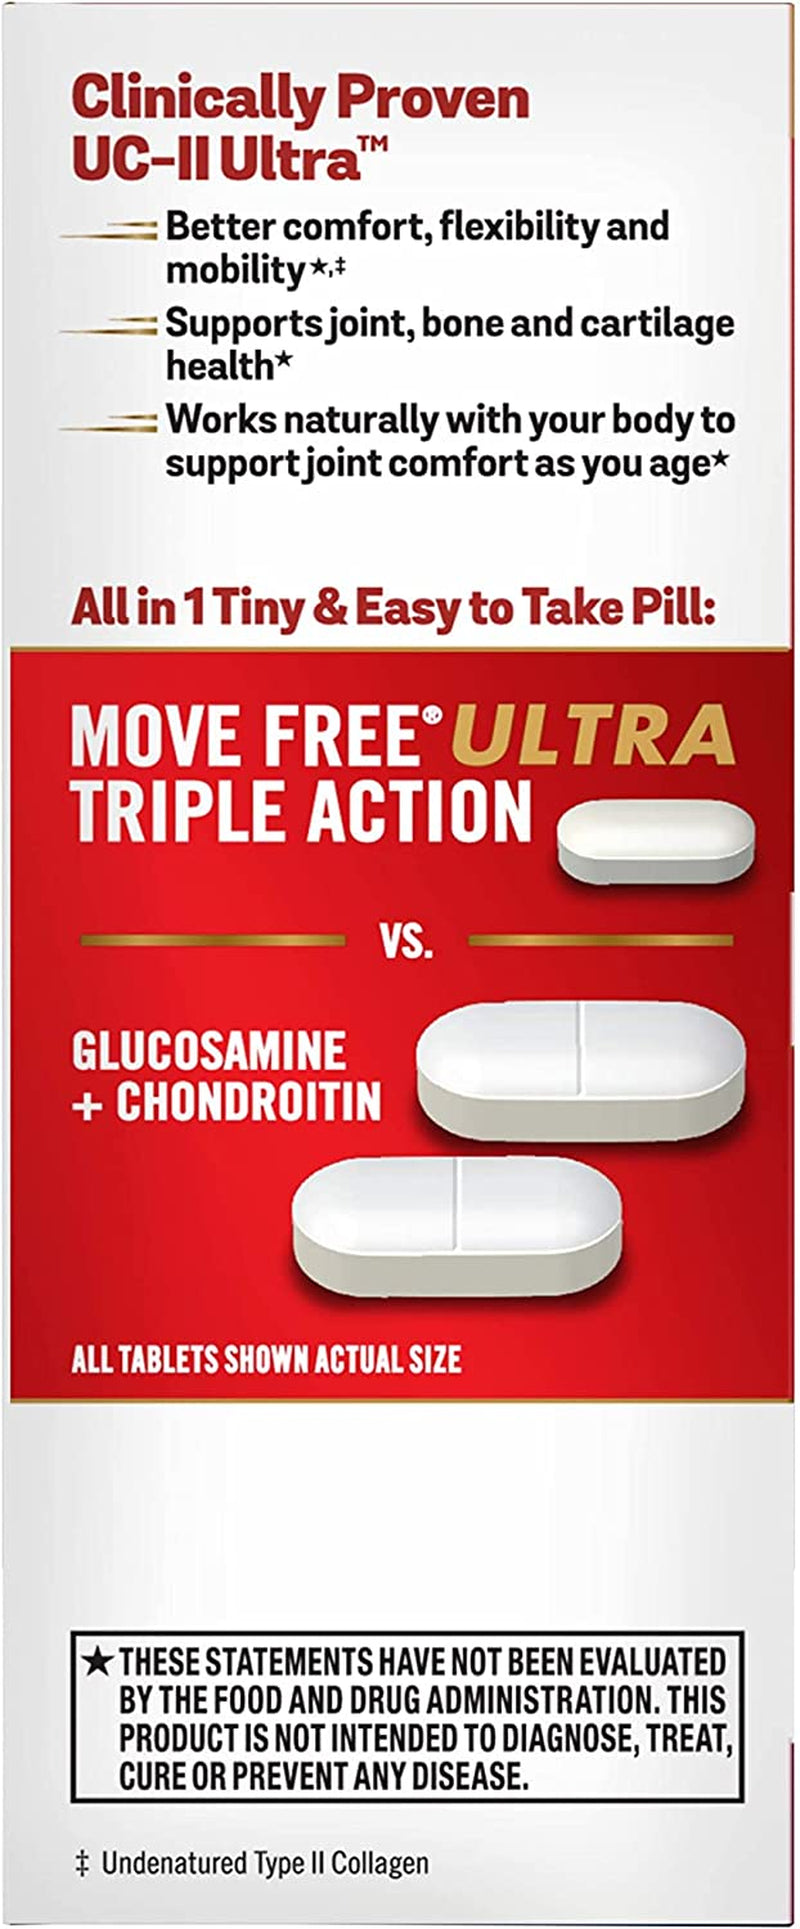 Move Free Ultra Triple Action Joint Support Supplement - Type II Collagen Boron & Hyaluronic Acid - Supports Joint Comfort, Cartiliage & Bones in 1 Tiny Pill per Day, 64 Tablets (64 Servings)*